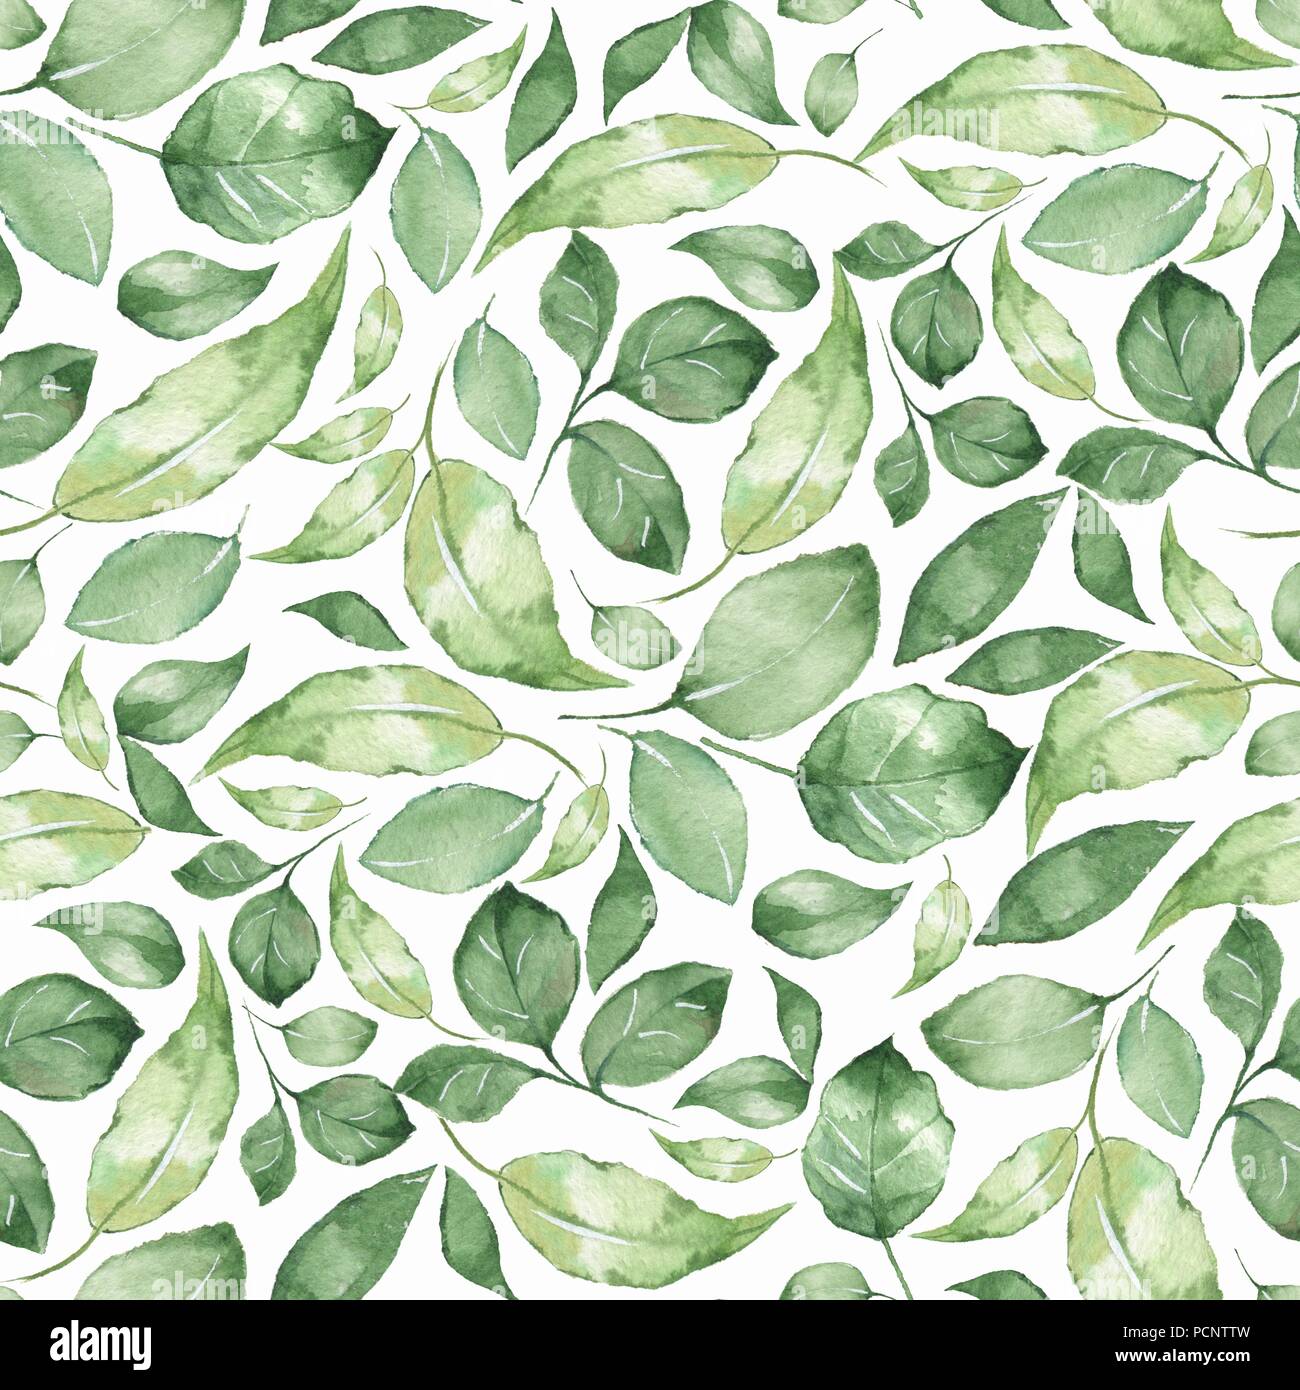 Floral pattern. Seamless background with green watercolor leaves Stock